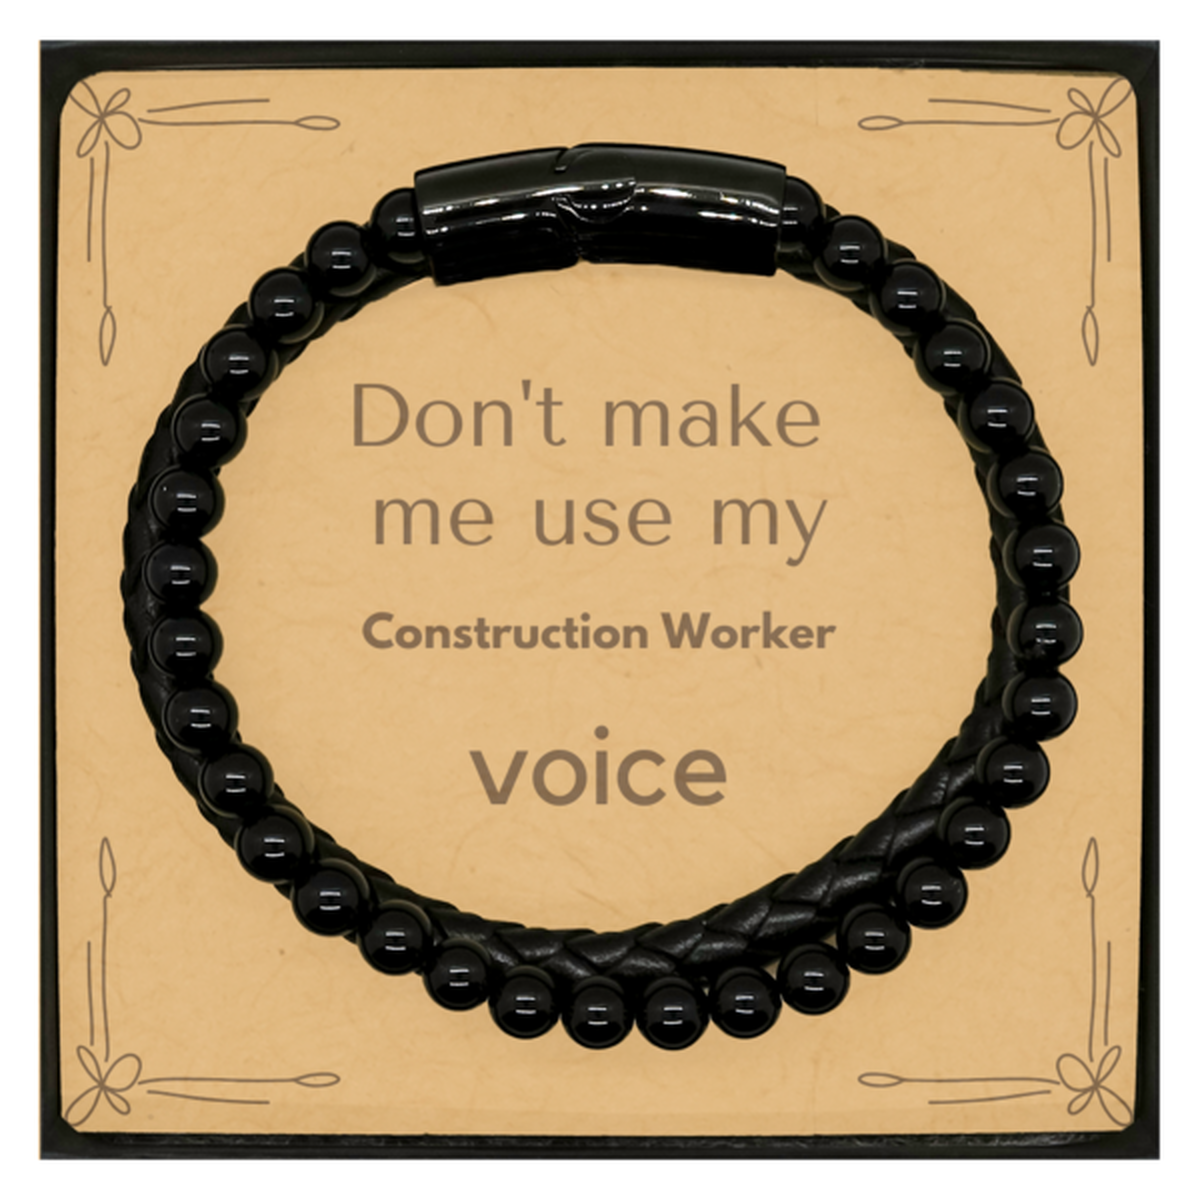 Don't make me use my Construction Worker voice, Sarcasm Construction Worker Card Gifts, Christmas Construction Worker Stone Leather Bracelets Birthday Unique Gifts For Construction Worker Coworkers, Men, Women, Colleague, Friends